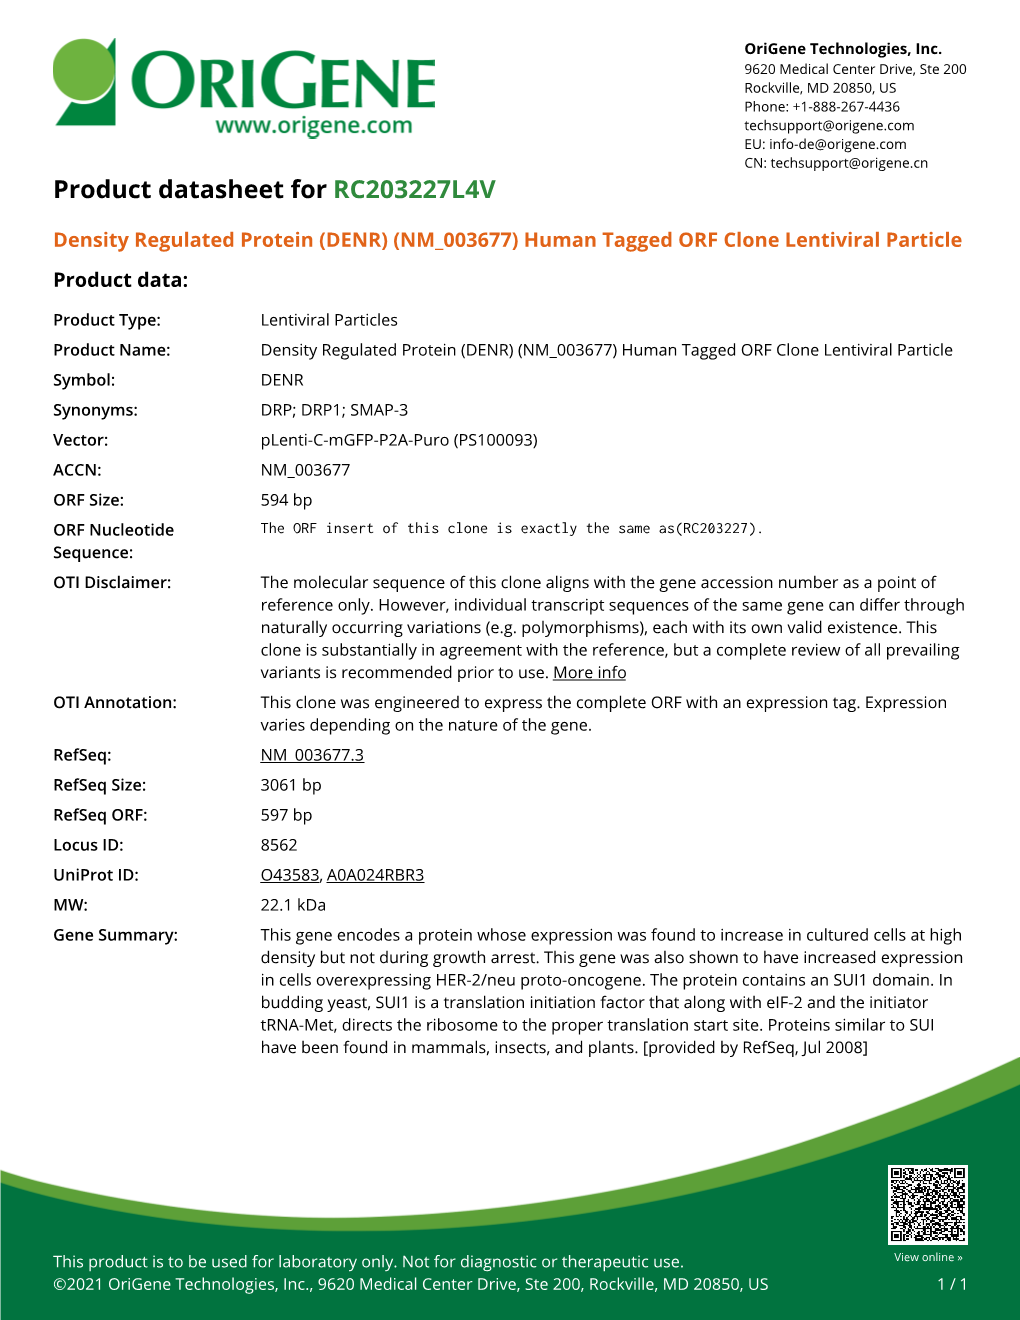 Density Regulated Protein (DENR) (NM 003677) Human Tagged ORF Clone Lentiviral Particle Product Data